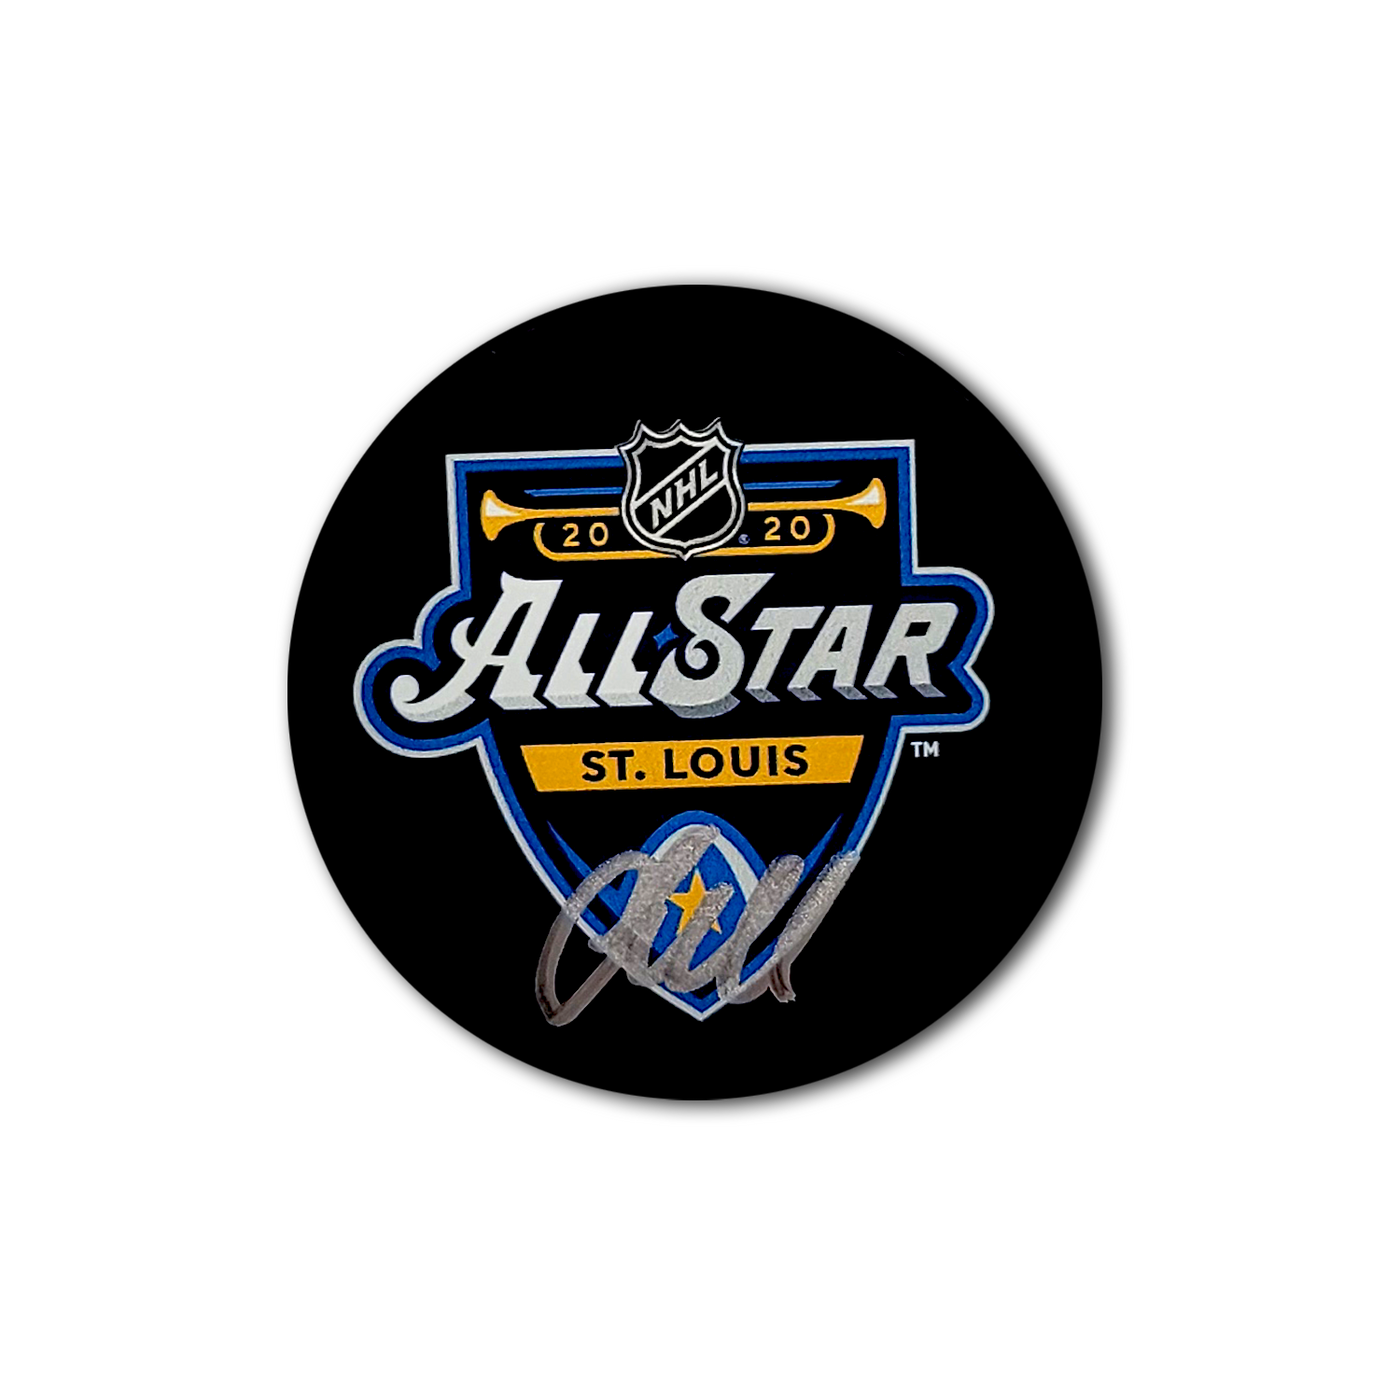 Jacob Markstrom 2020 NHL All Star Autographed Hockey Puck